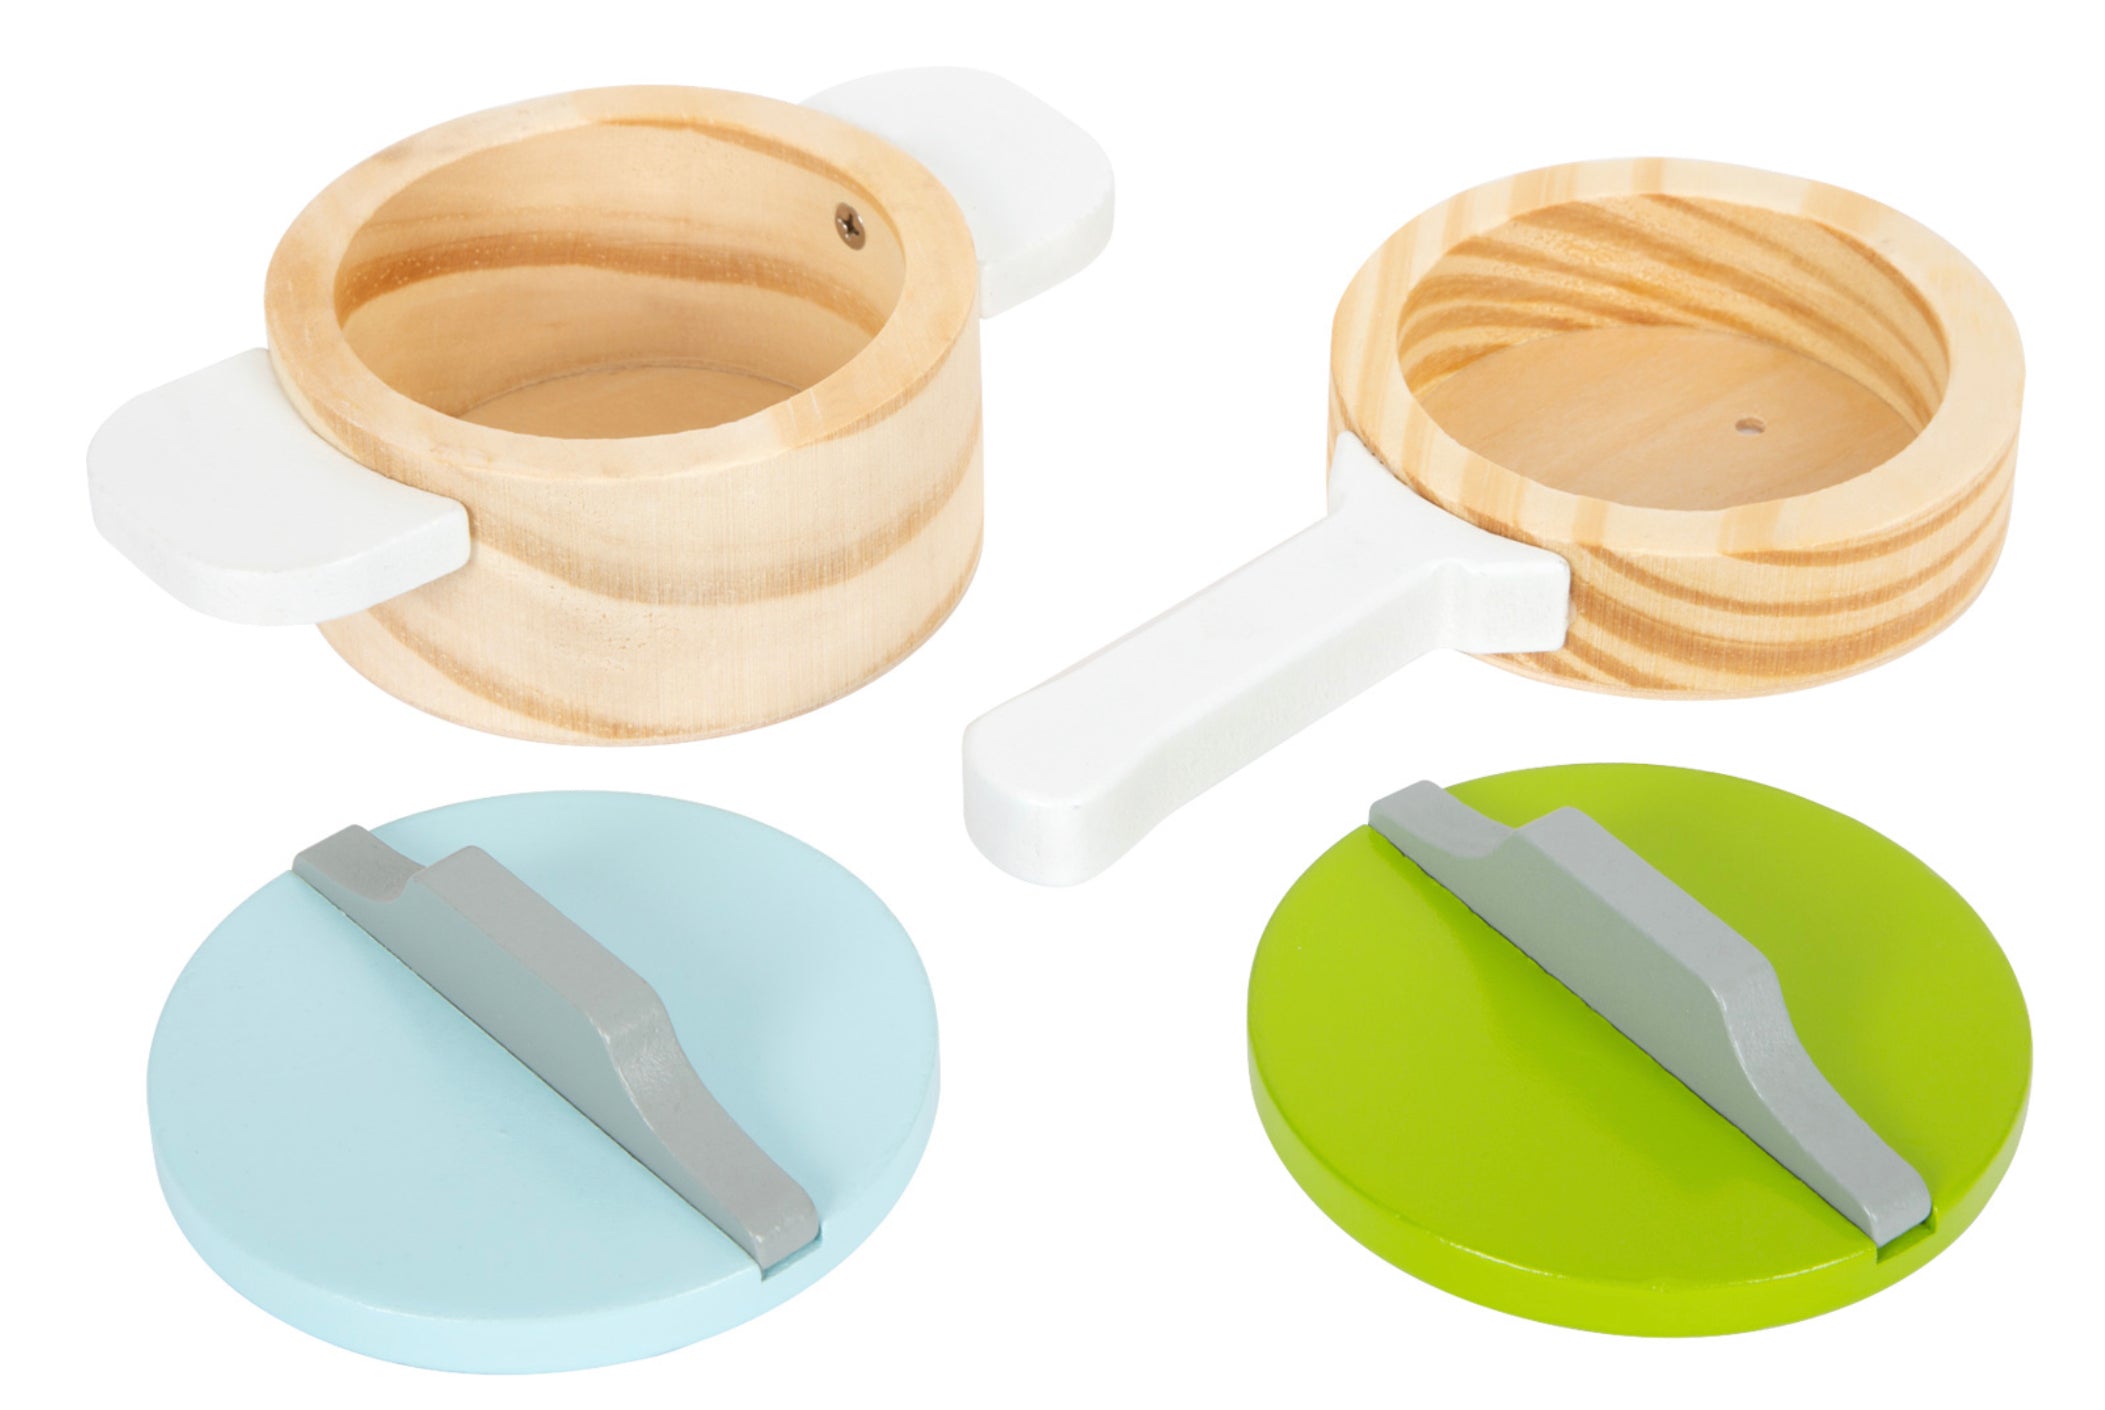 Crockery and Cookware Playset-Small Foot